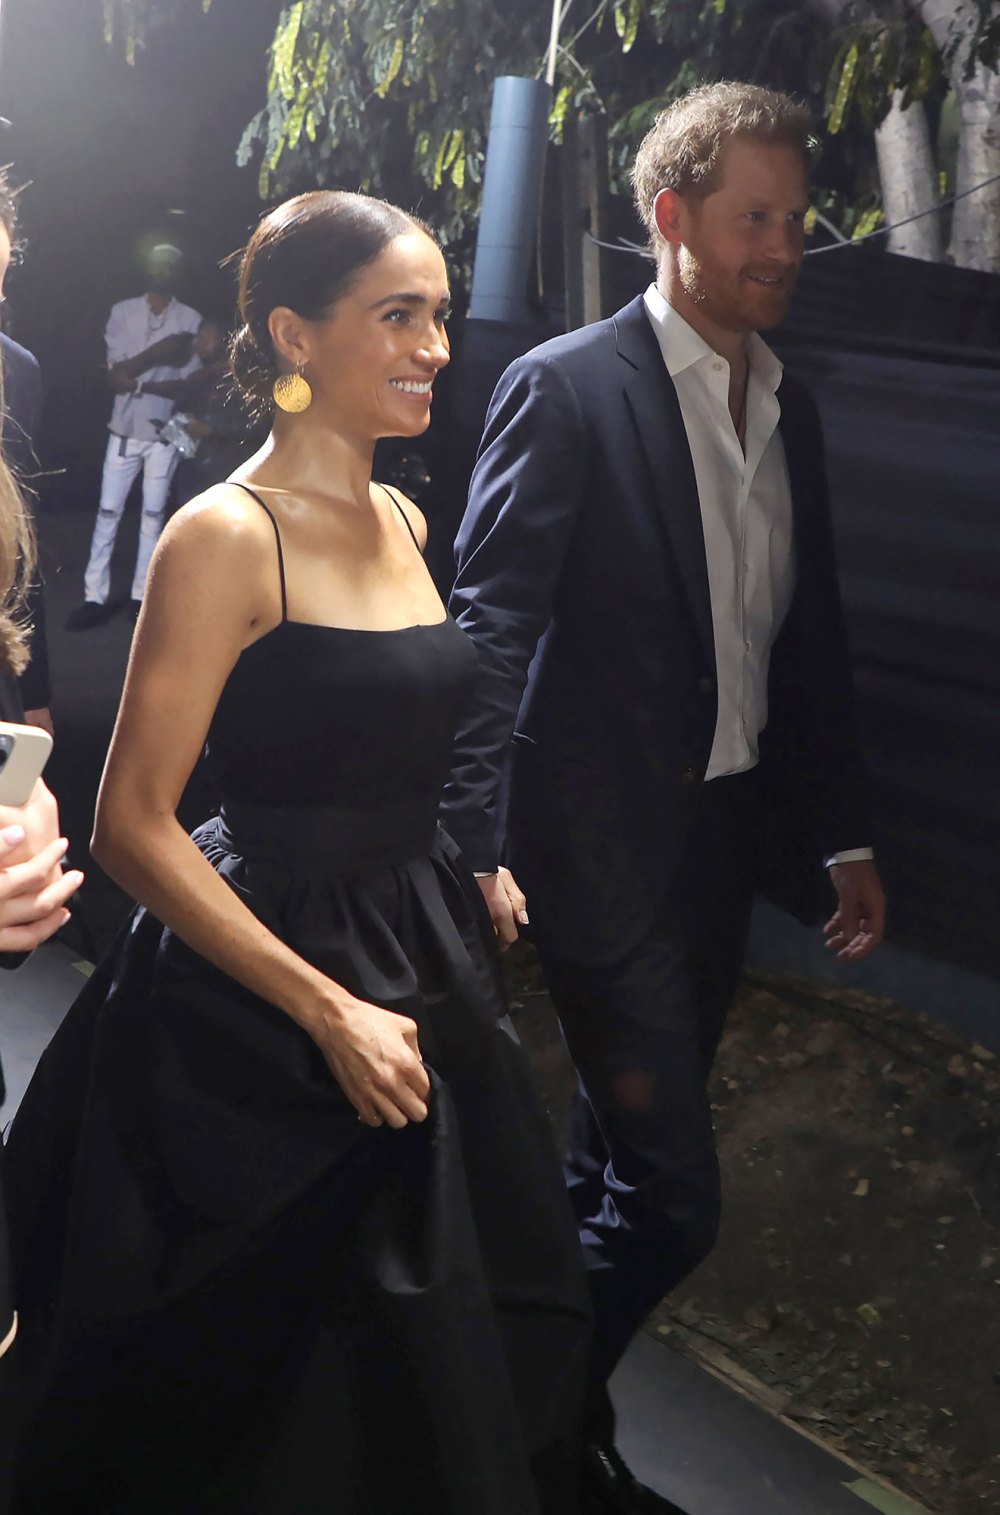 Prince Harry and Meghan Markle Dress to Impress for Bob Marley One Love Premiere Date Night 2